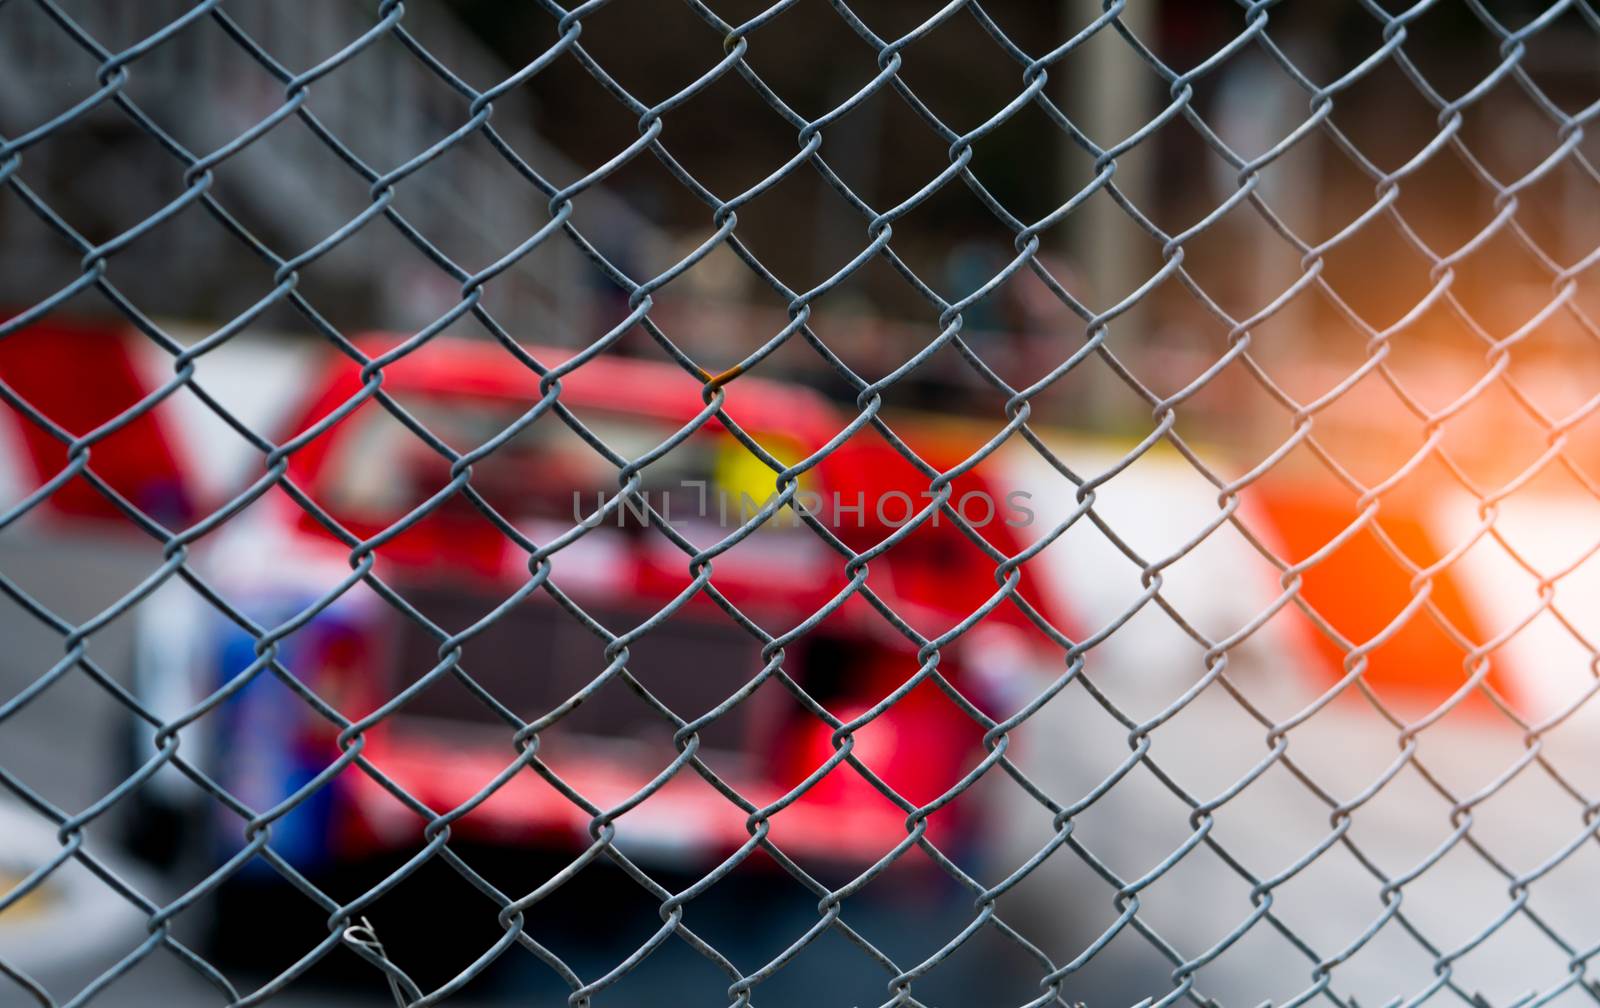 Motorsport car racing on asphalt road. View from the fence mesh netting on blurred car on racetrack background. Super racing car on street circuit. Automotive industry concept. by Fahroni